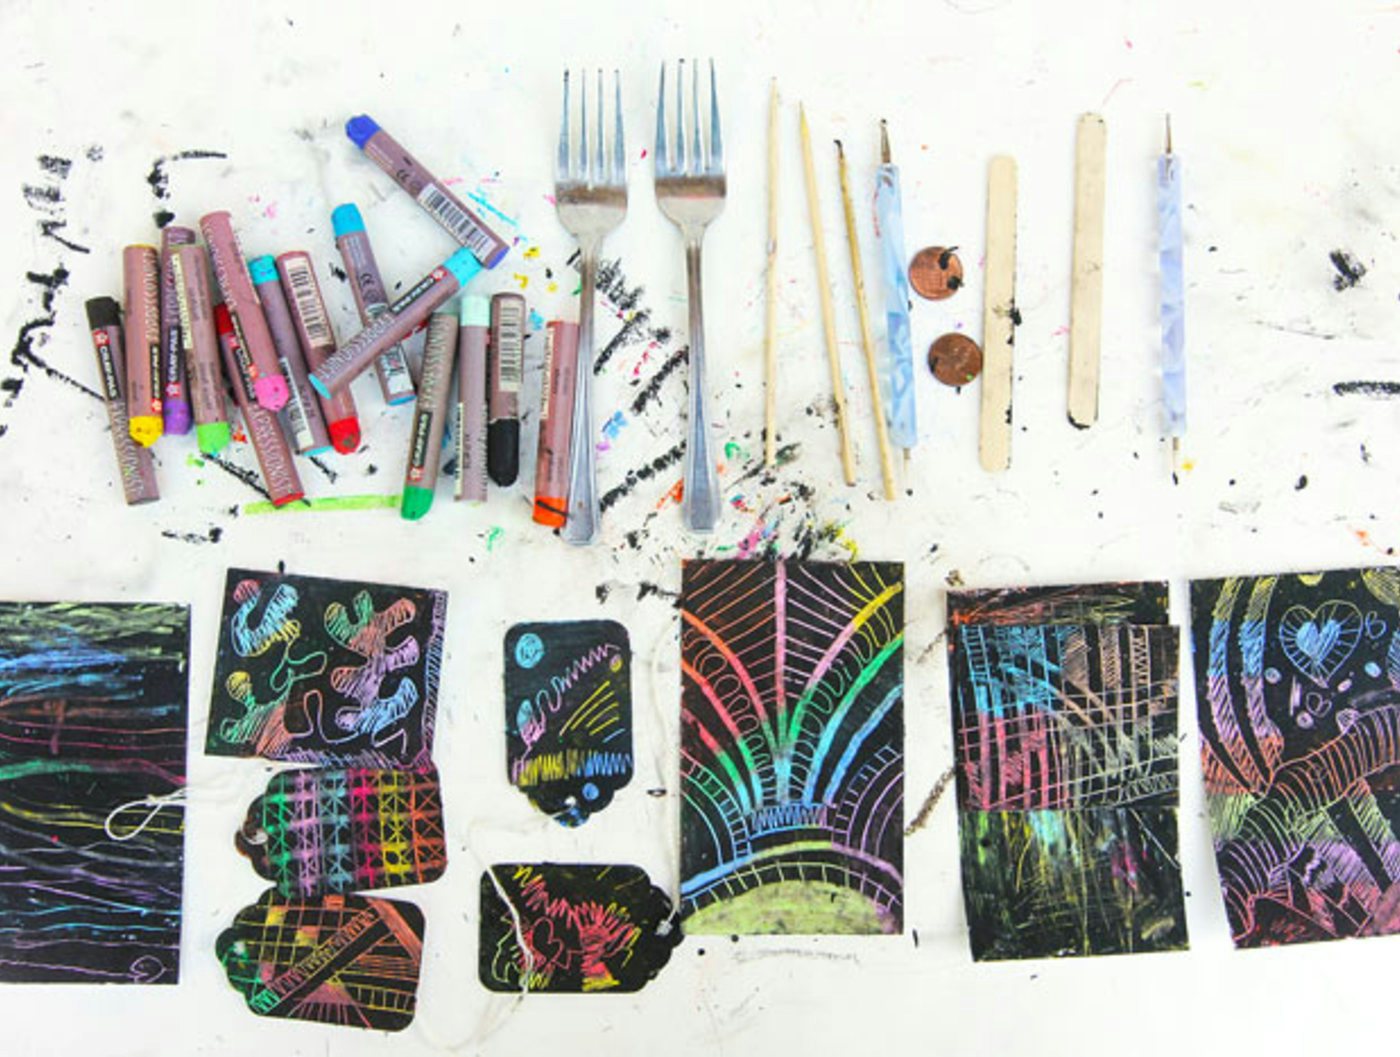 YOUNG ADULT LAB: SCRATCH ART